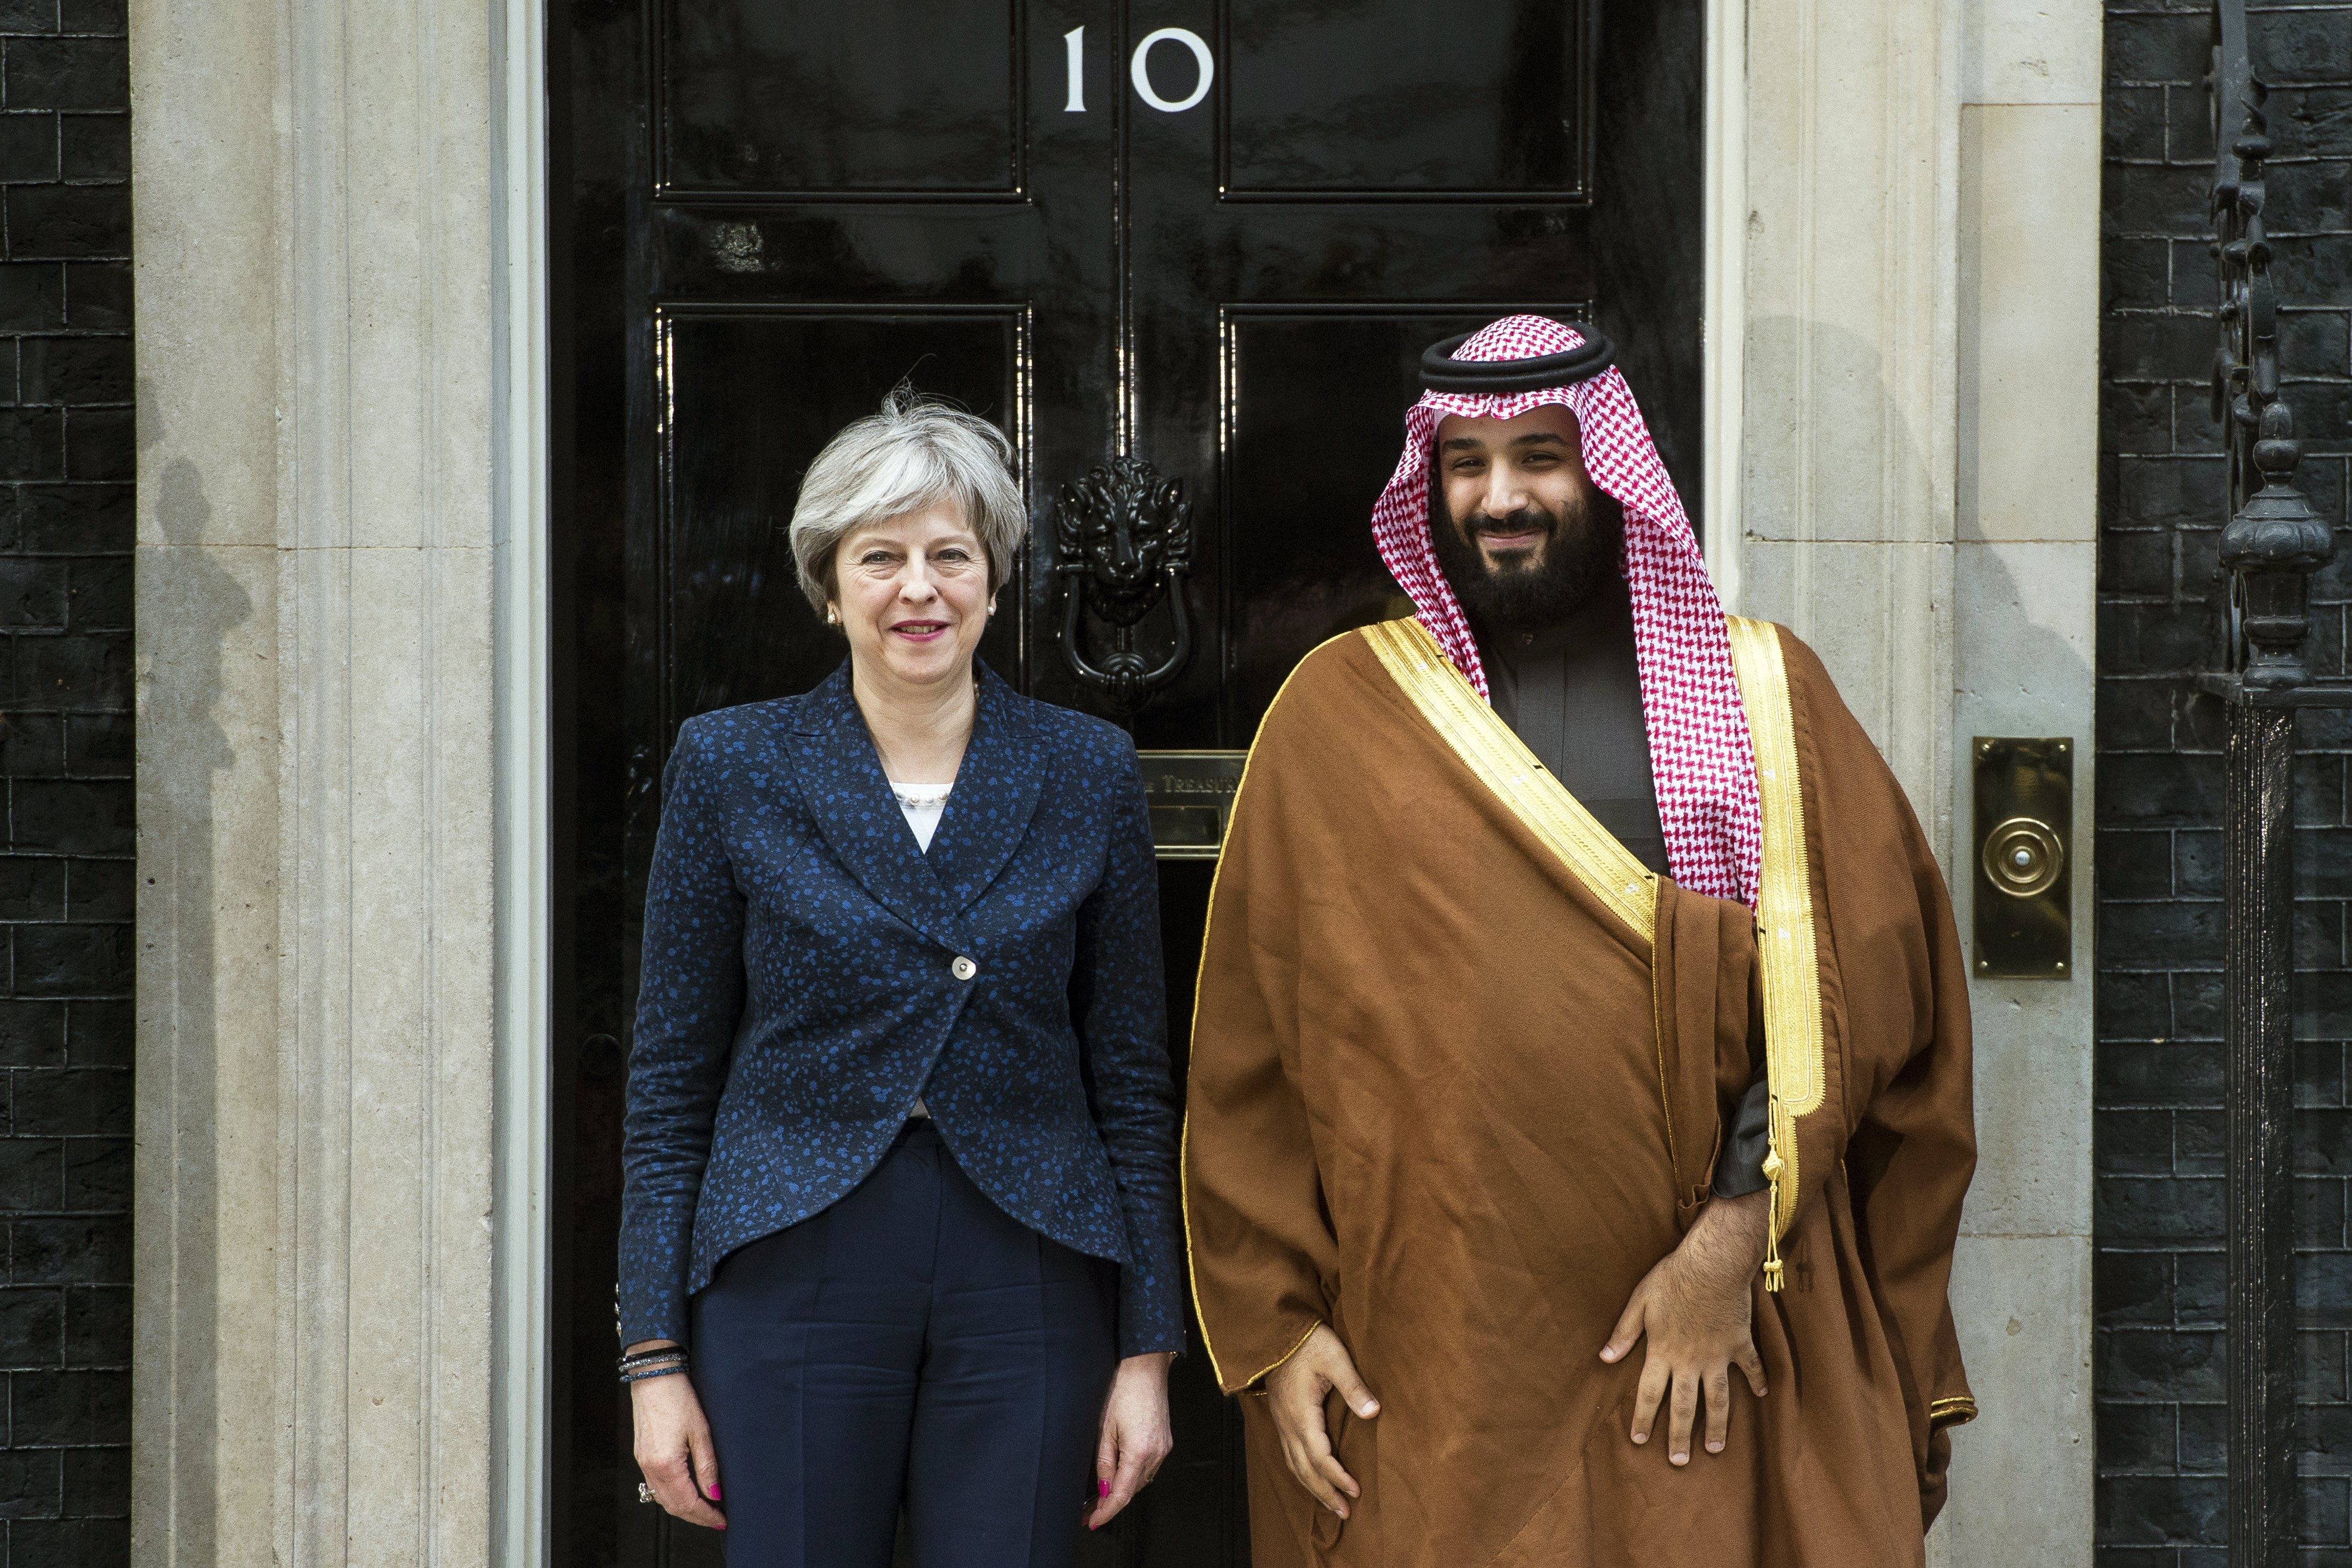 Britain’s then Prime Minister Theresa May with Saudi Arabian Crown Prince Mohammad bin Salman Al Saud at 10 Downing Street in 2018. Since late 2019 May has pocketed more than £100,000 from a speech she gave in Saudi Arabia, as well as over £2 million in other extra earnings. Photo: EPA-EFE